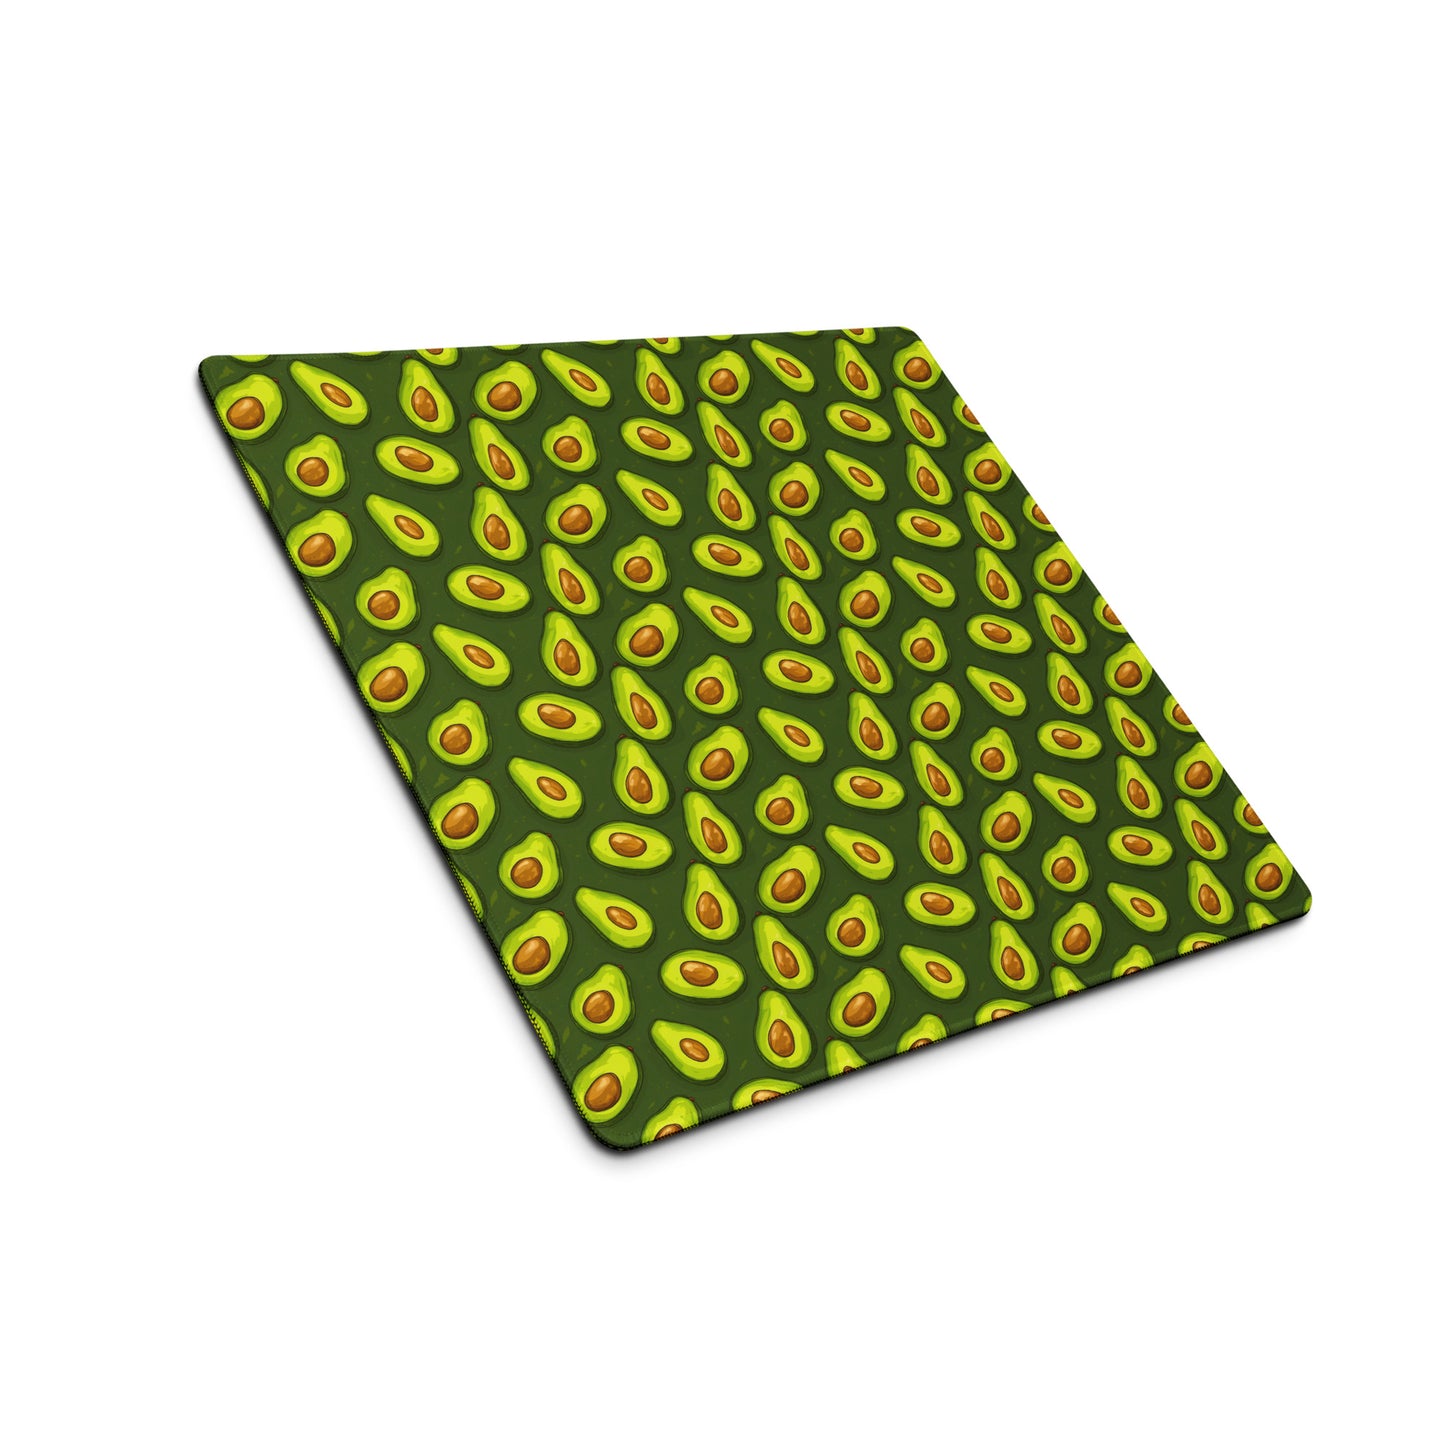 A 18" x 16" desk pad with lots of avocados on it shown at an angle. Green in color.